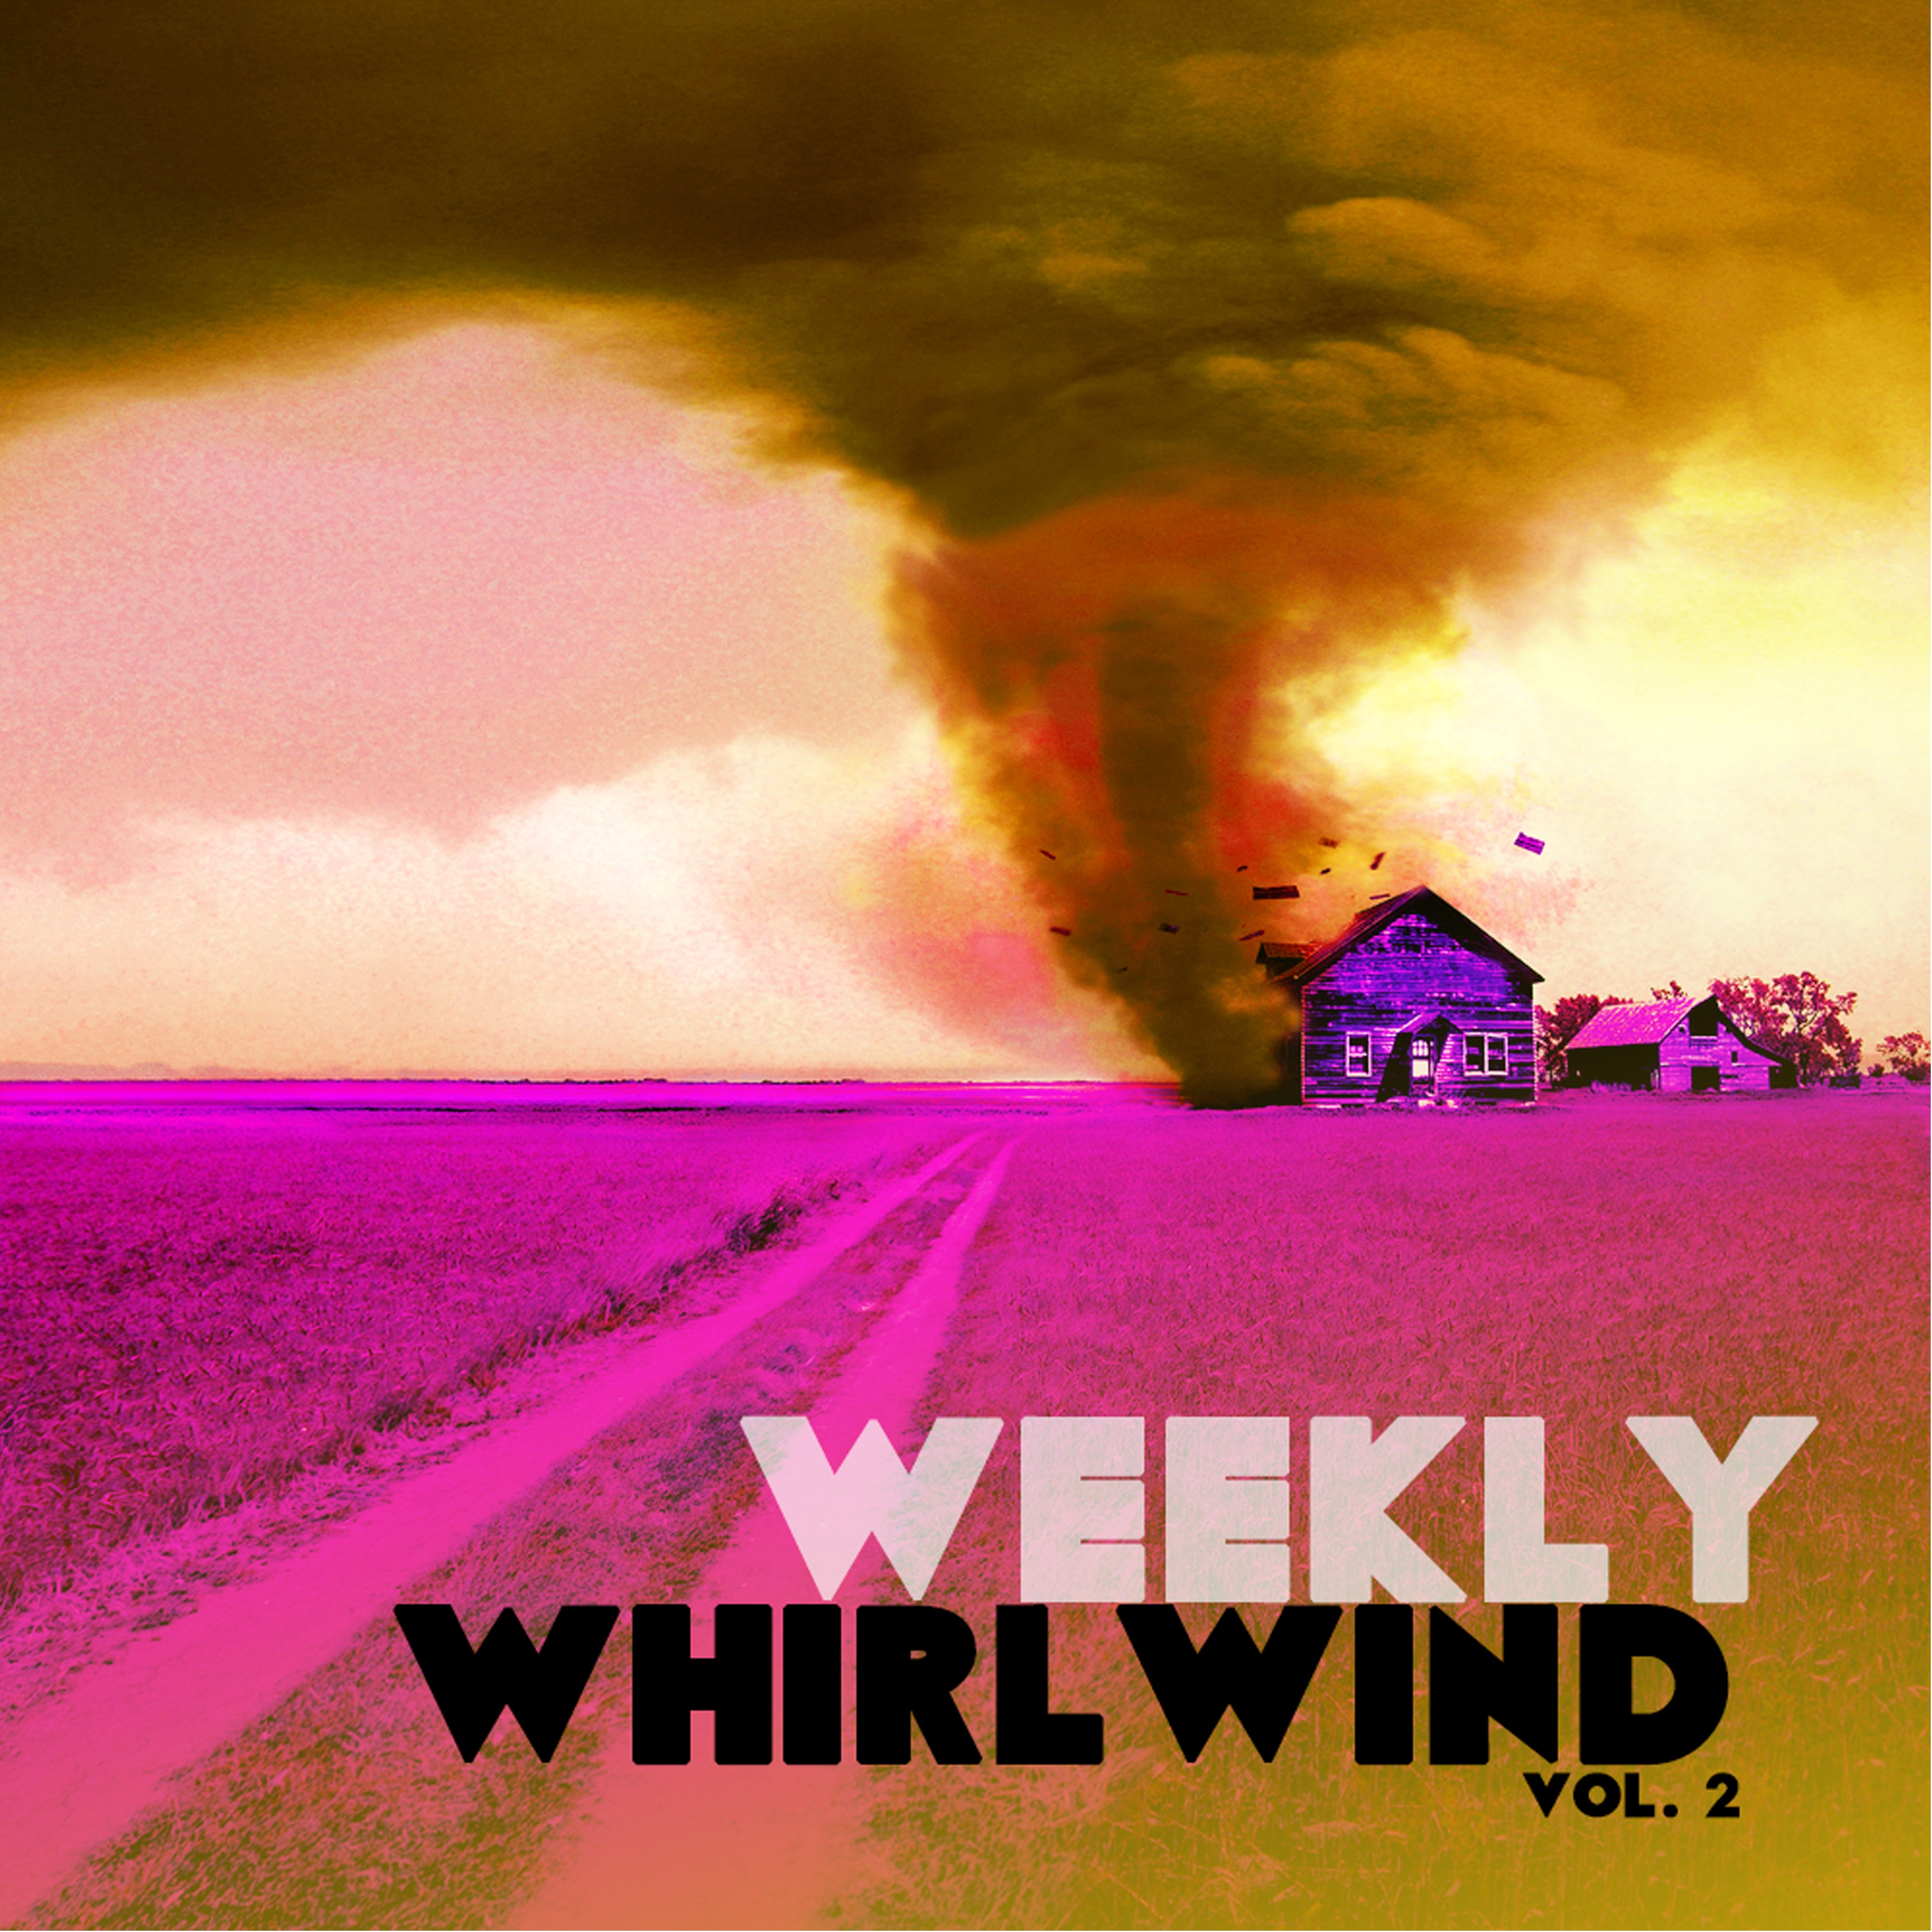 Weekly Whirlwind, Vol. 2